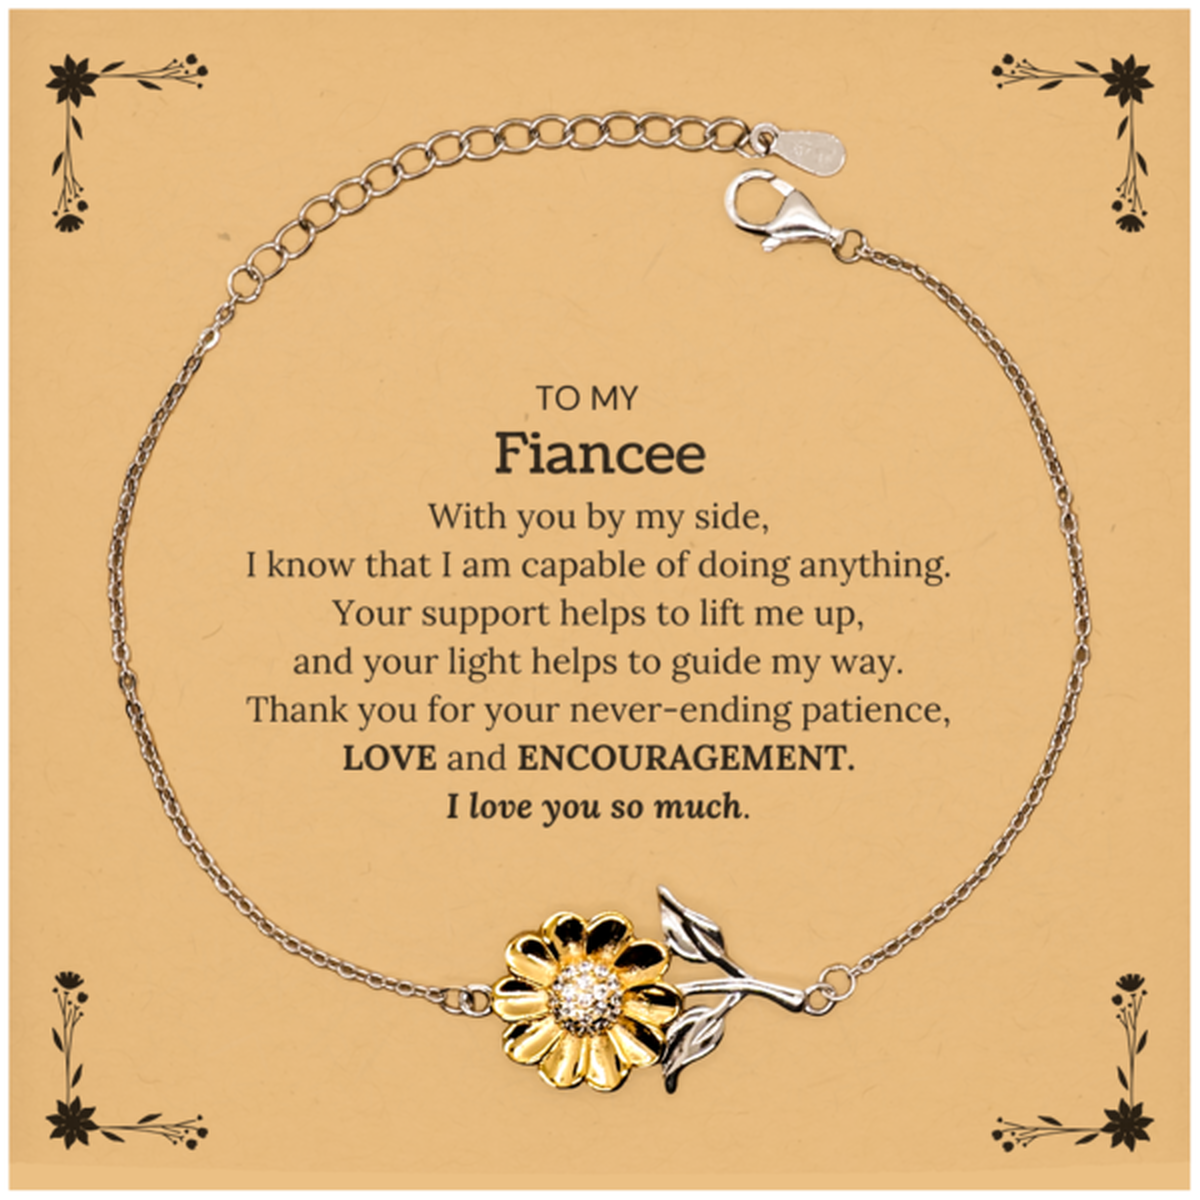 Appreciation Fiancee Sunflower Bracelet Gifts, To My Fiancee Birthday Christmas Wedding Keepsake Gifts for Fiancee With you by my side, I know that I am capable of doing anything. I love you so much